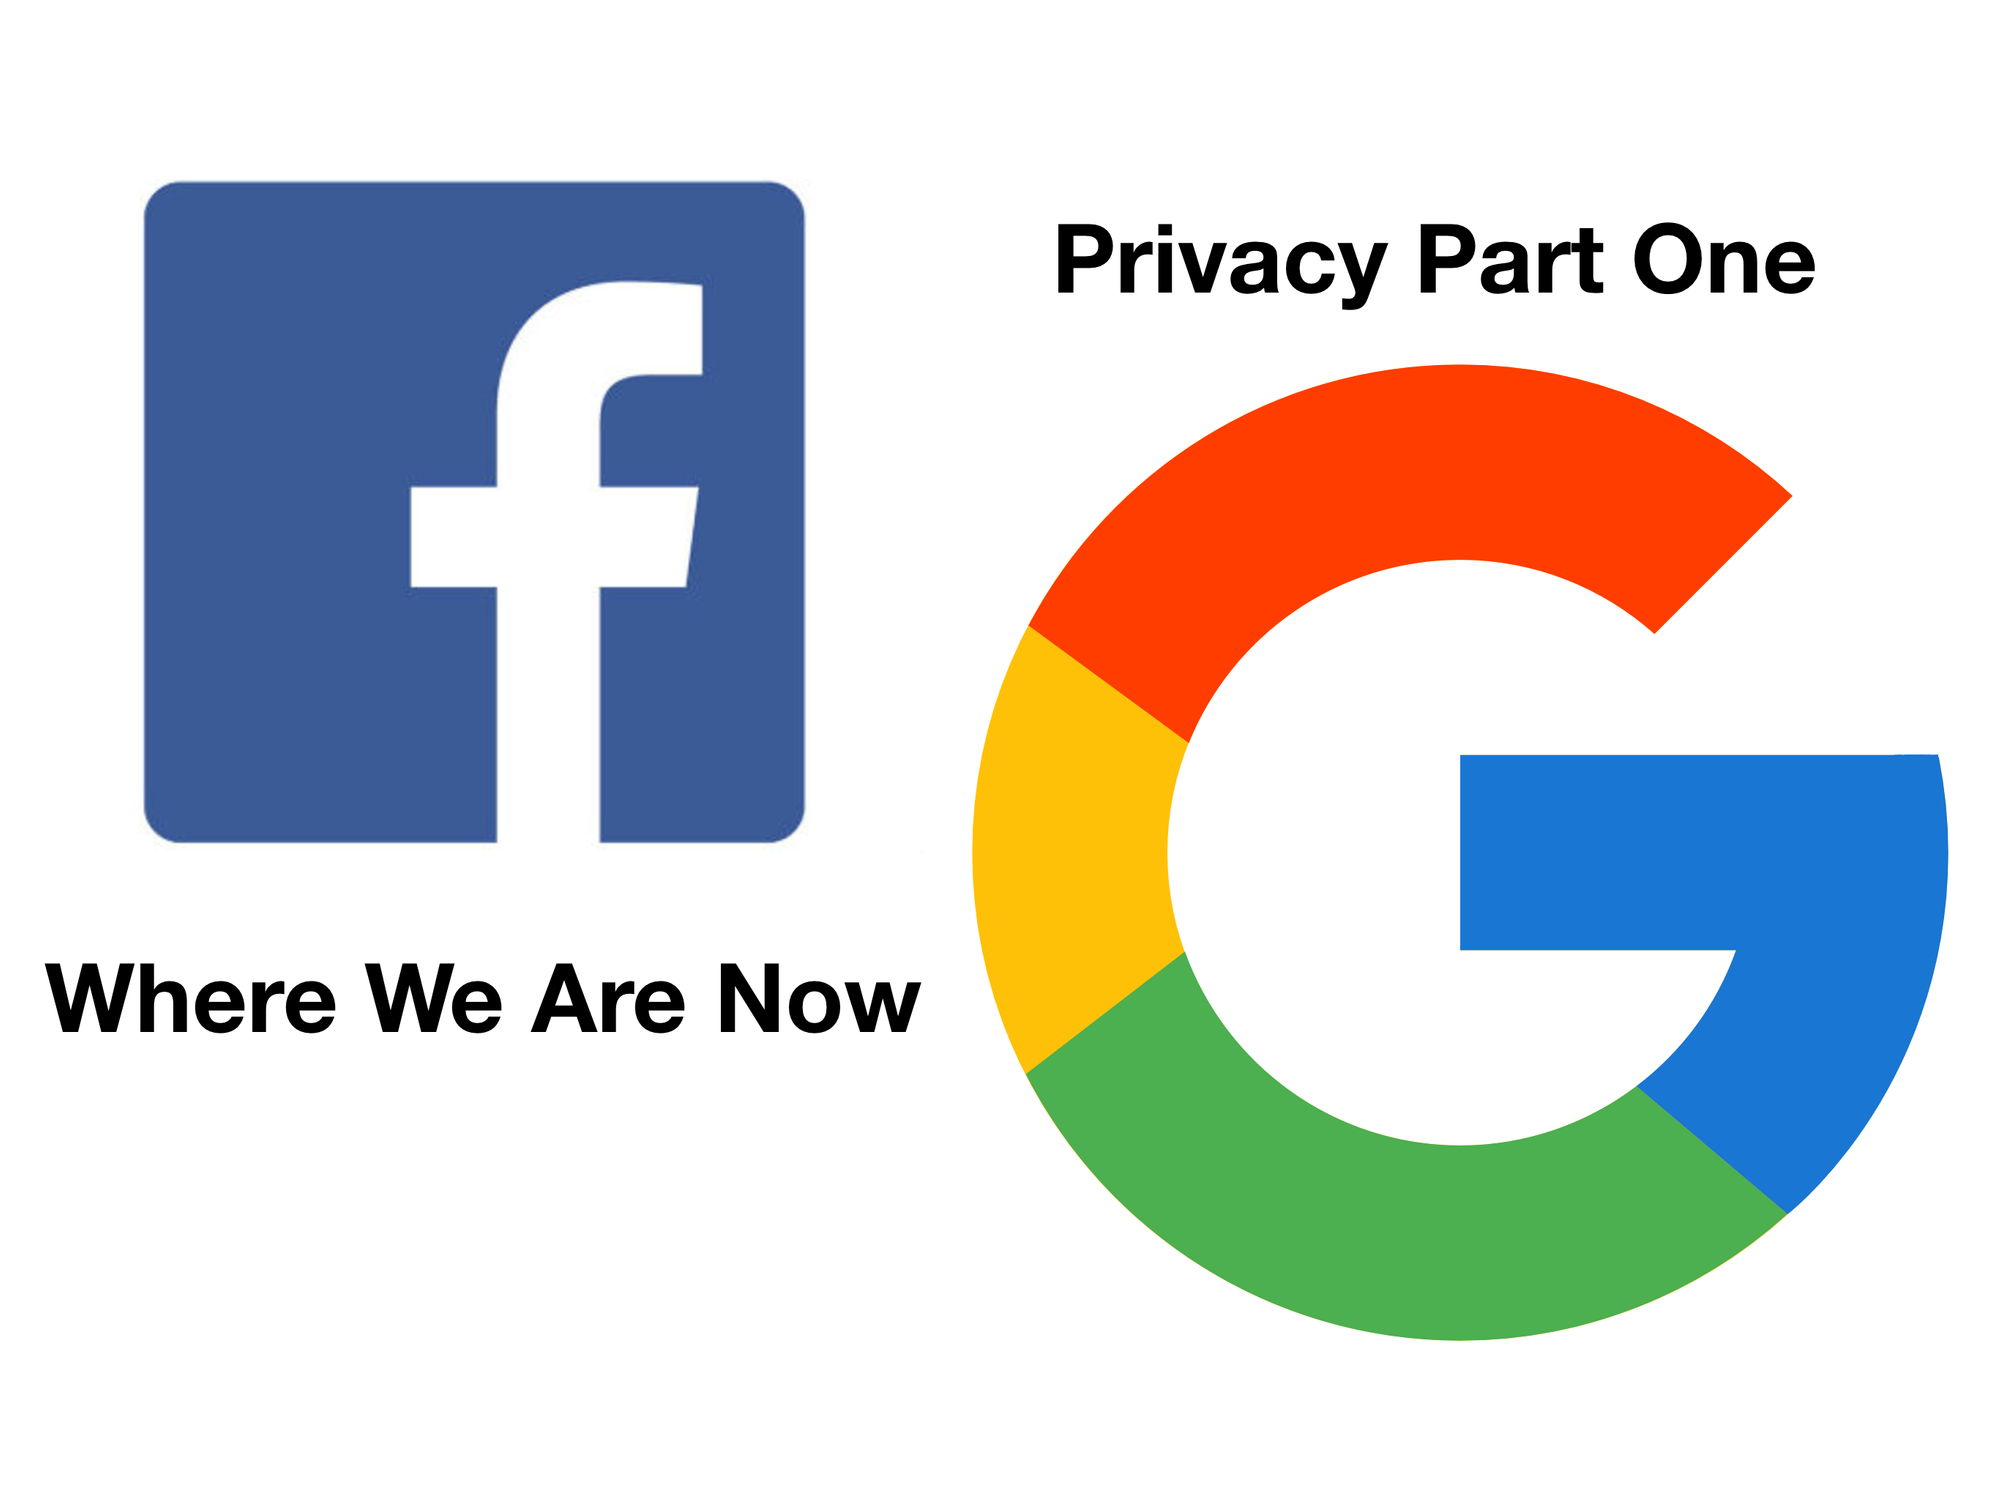 Privacy 2019 Part One: Where We Are Now